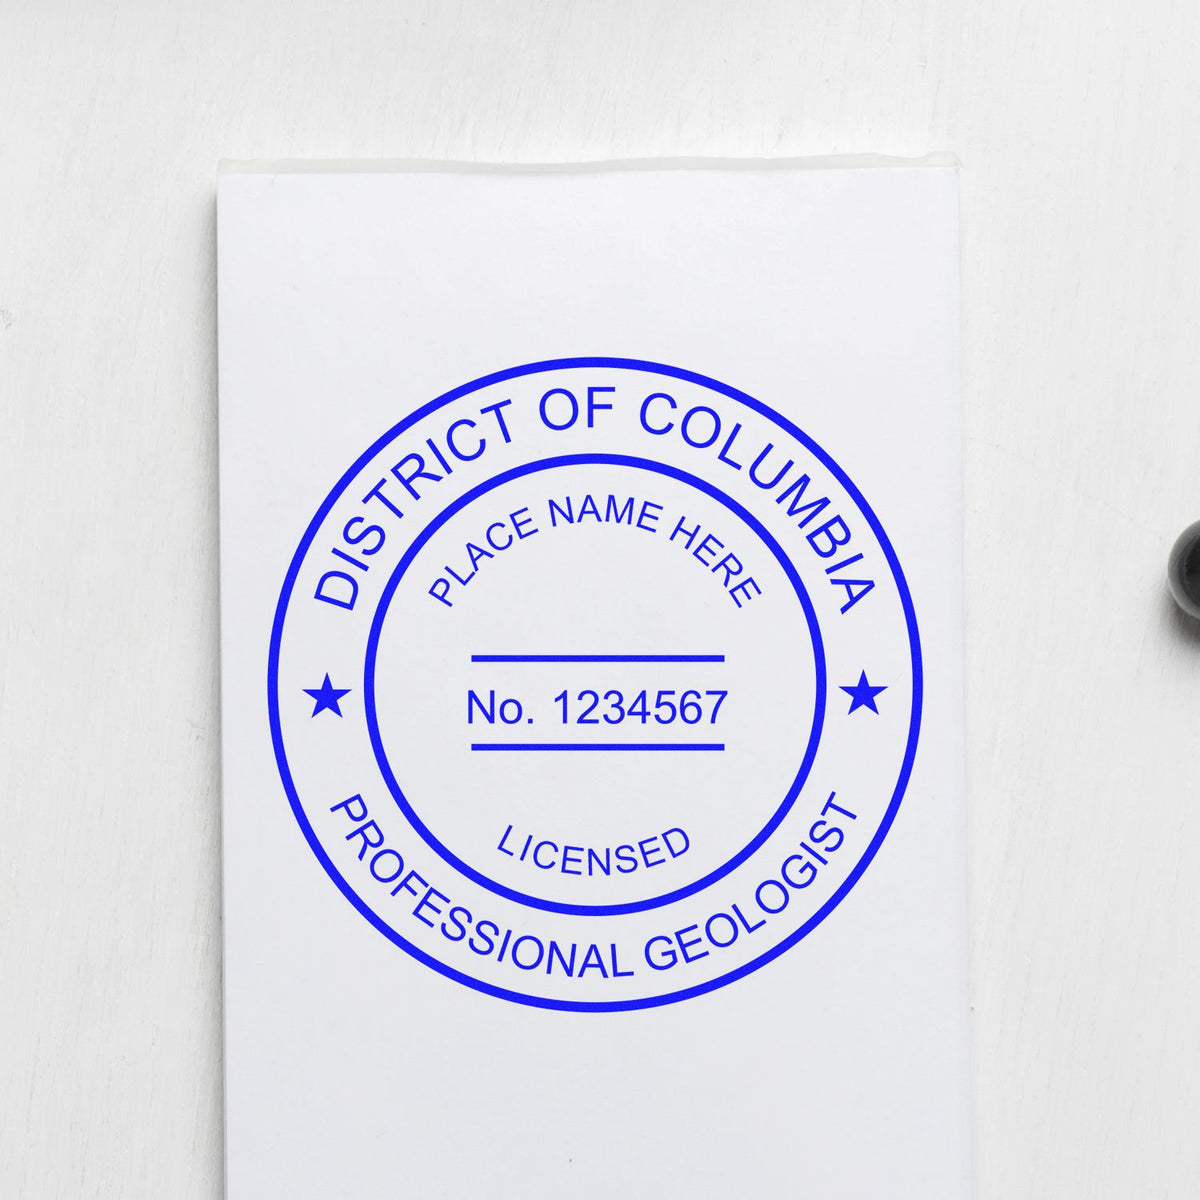 An alternative view of the Self-Inking District of Columbia Geologist Stamp stamped on a sheet of paper showing the image in use